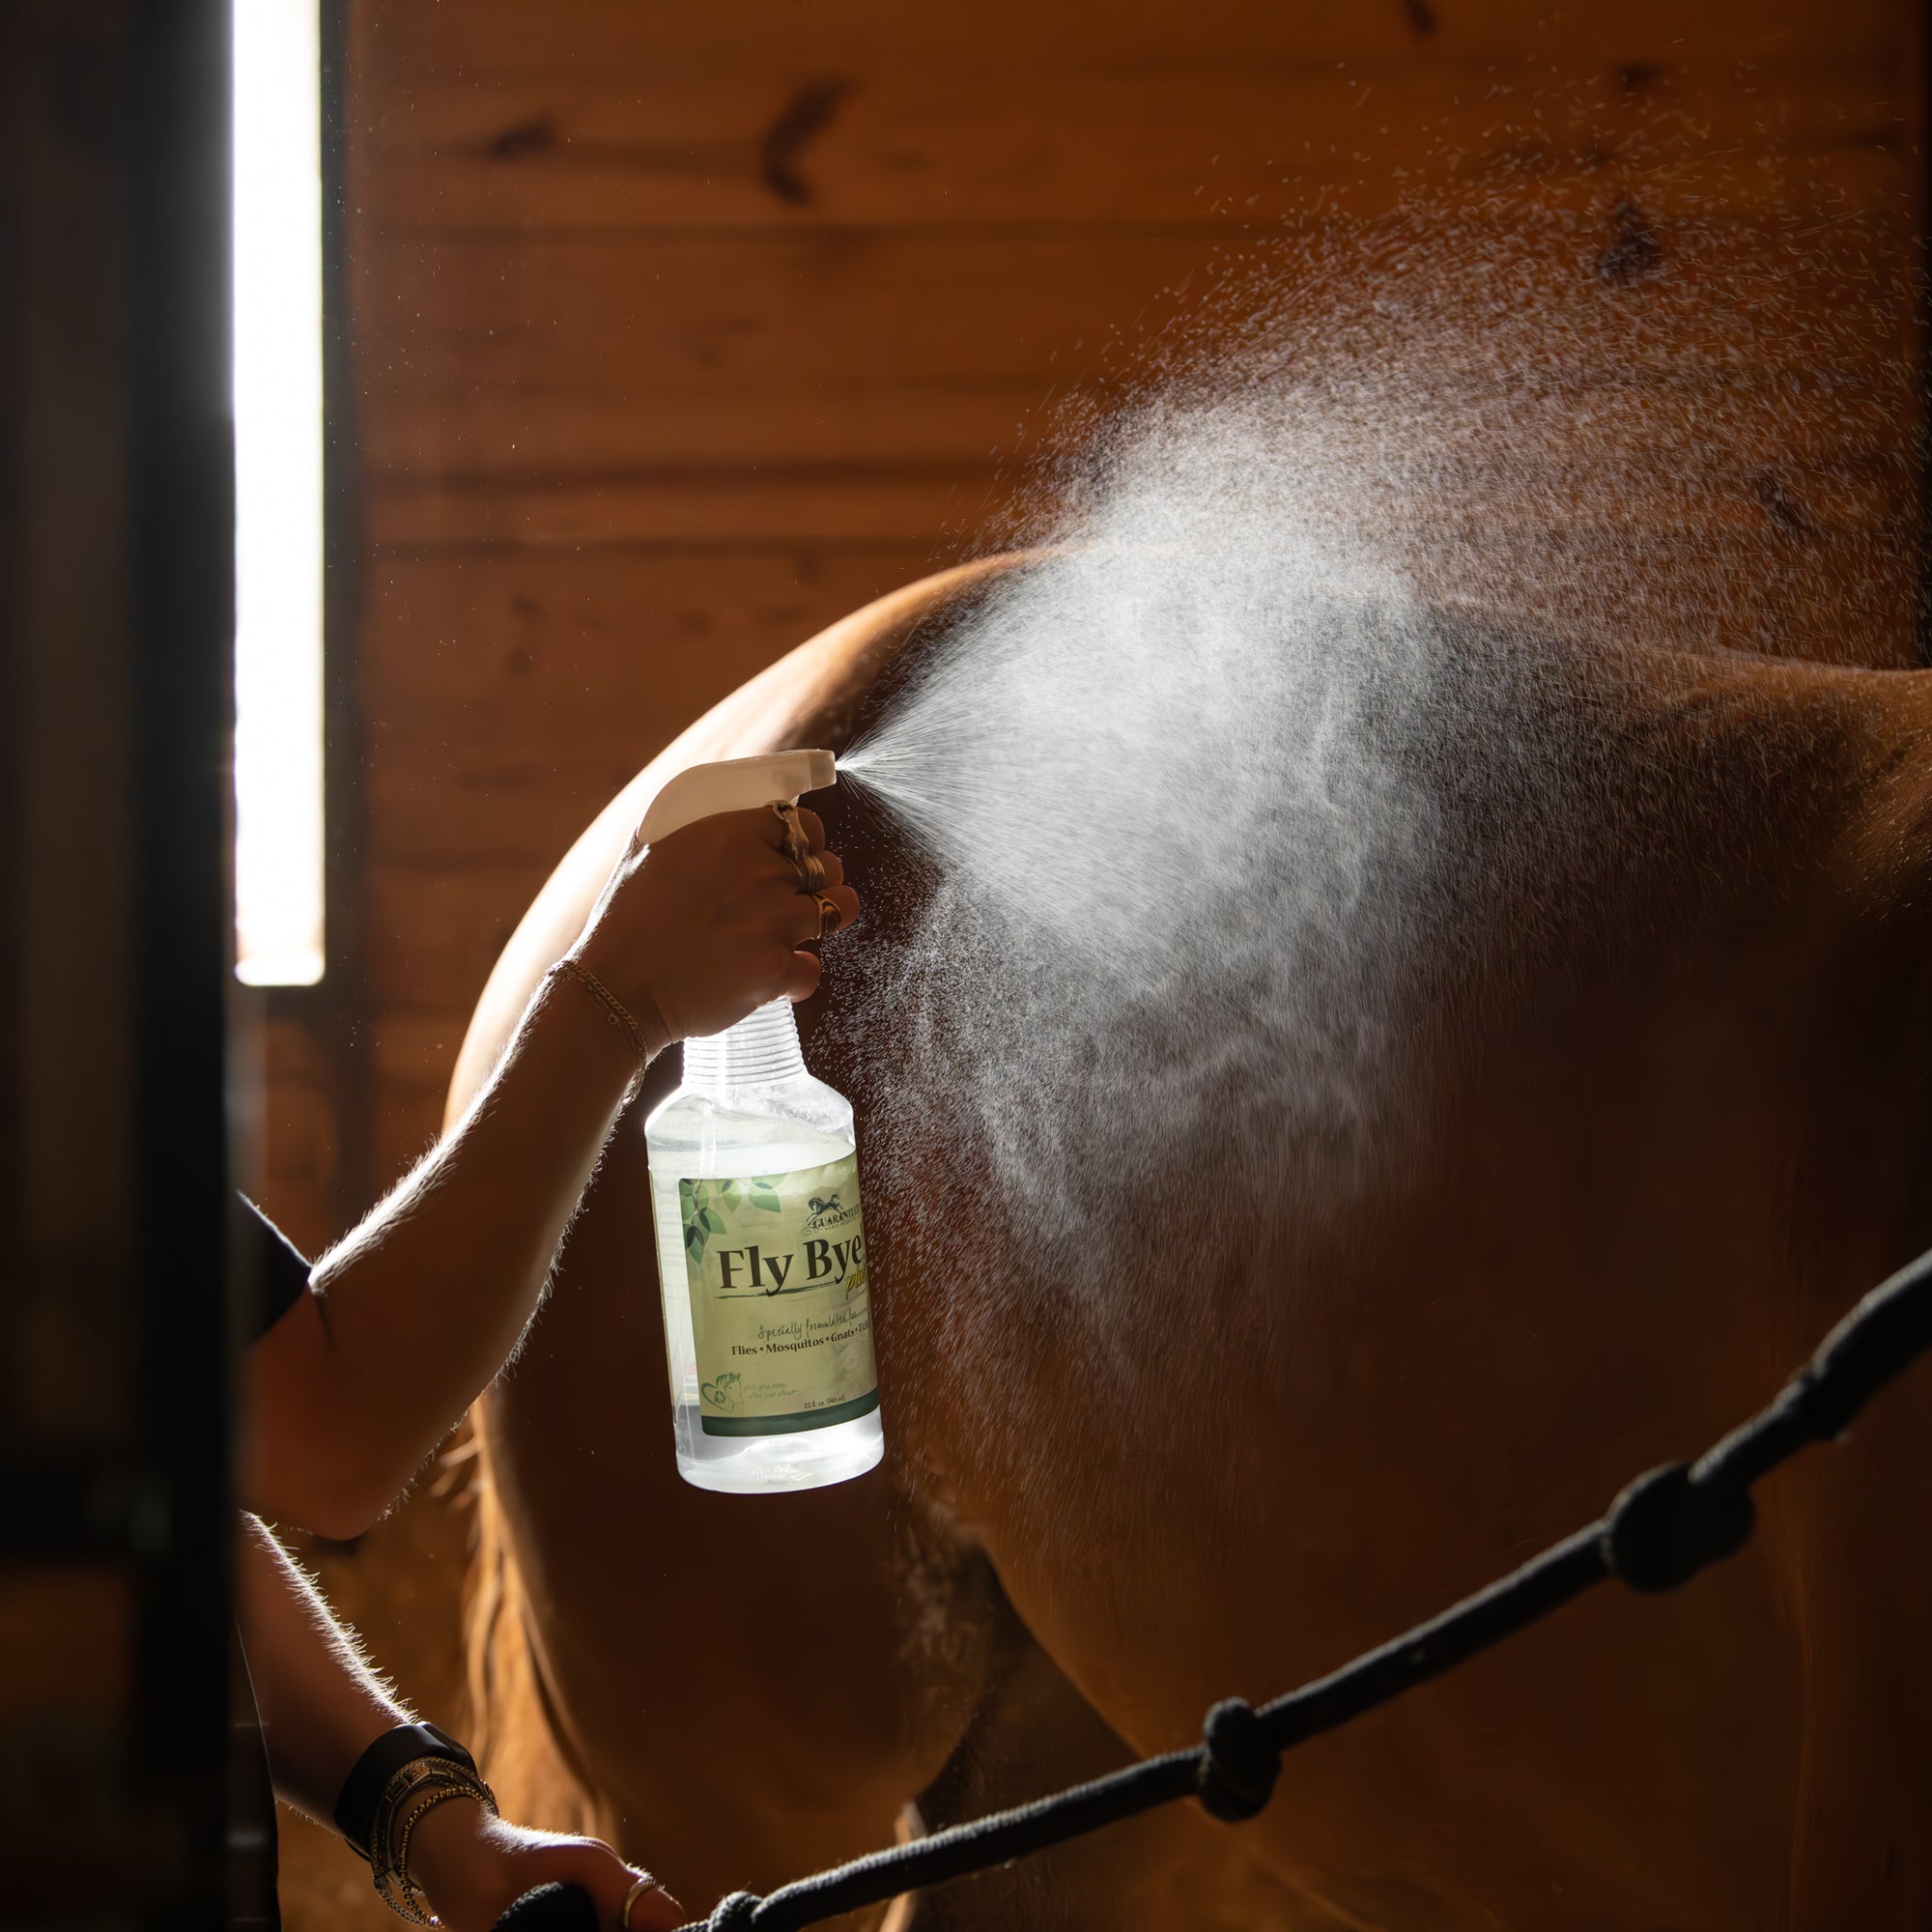 Natural fly spray being sprayed onto horse for fly control